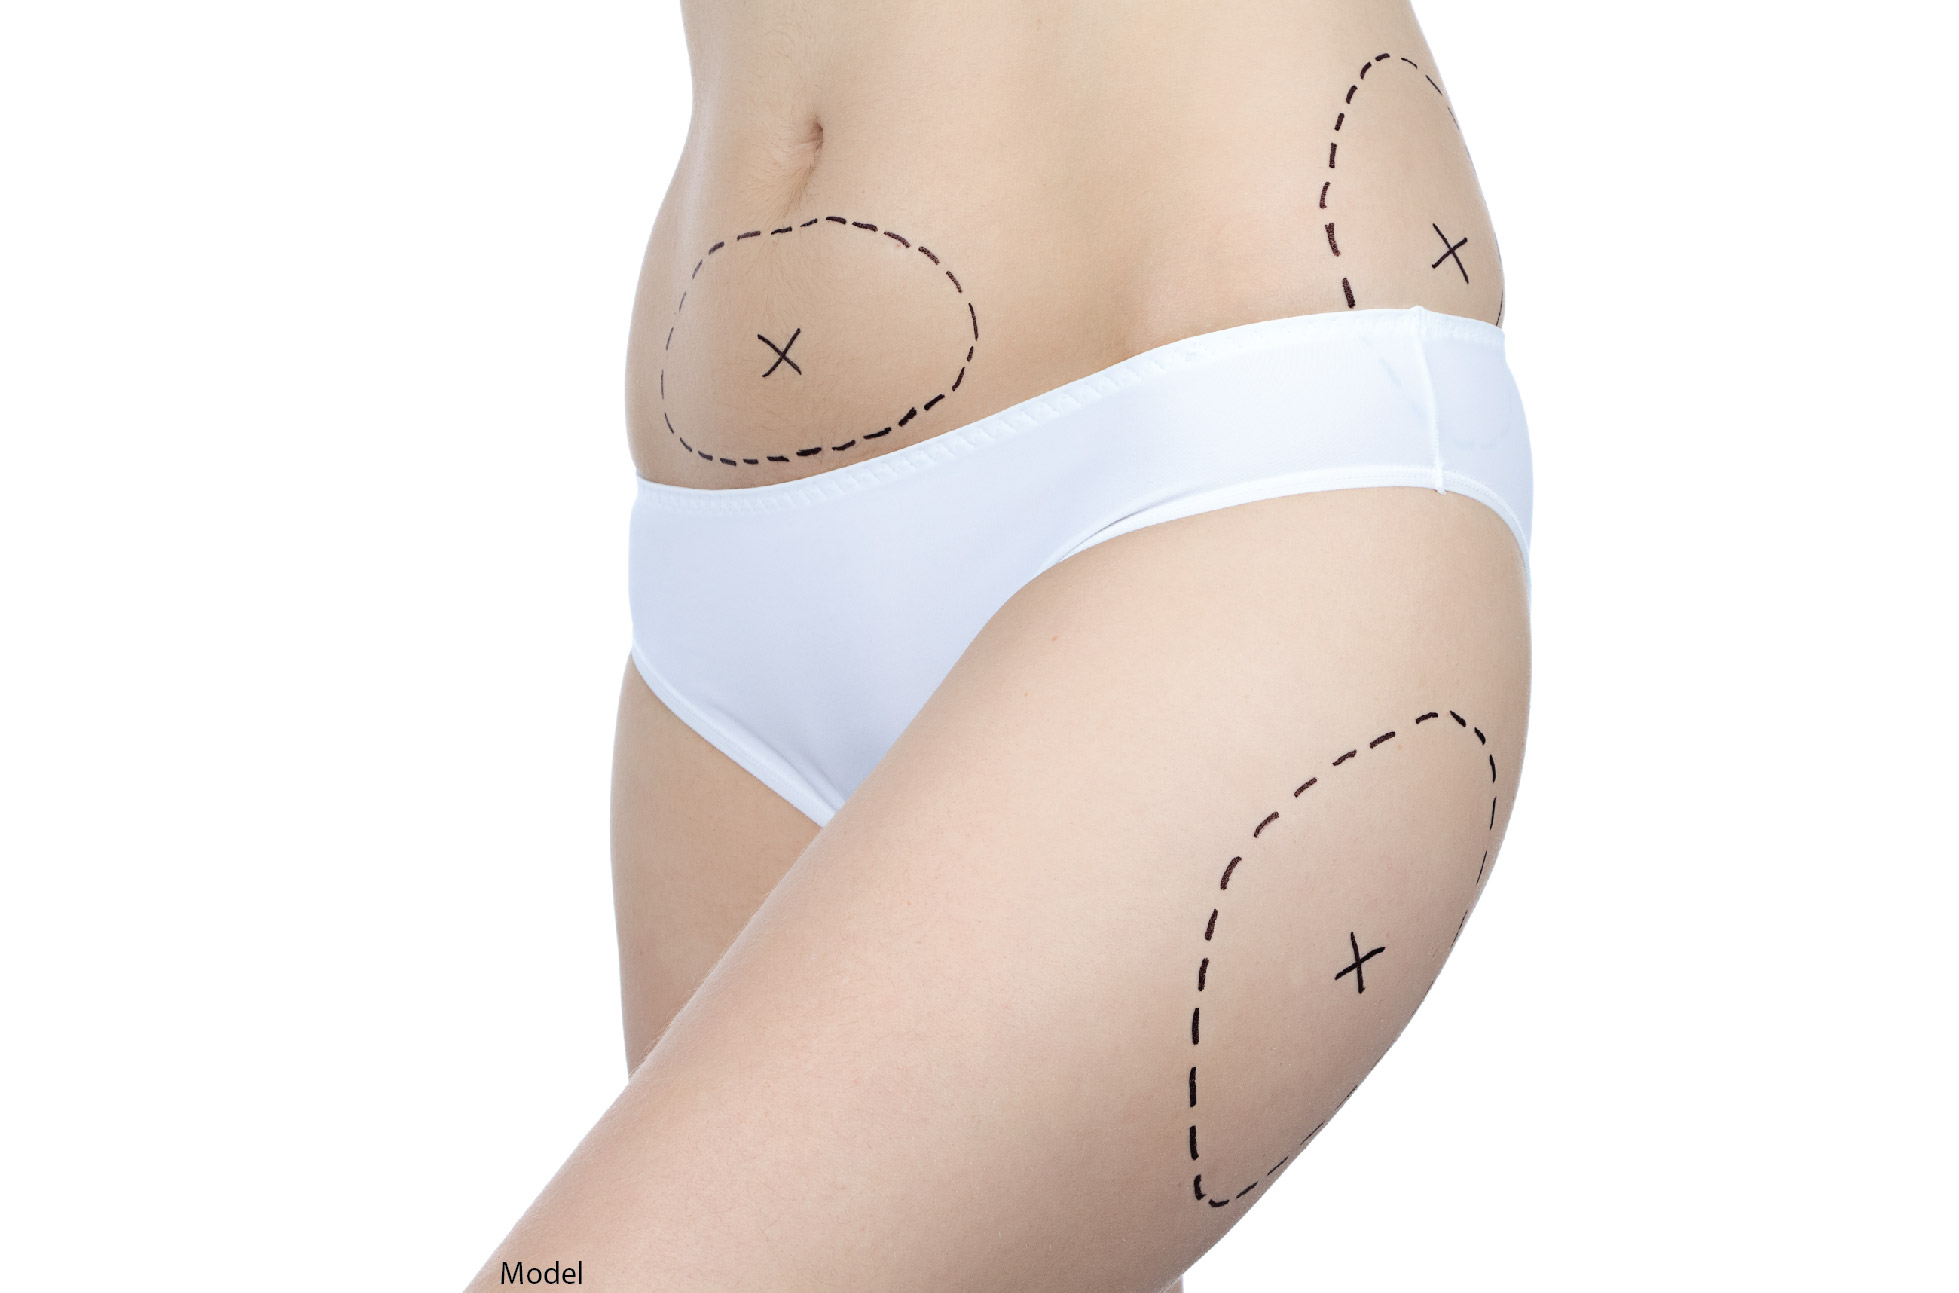 One Liposuction Session